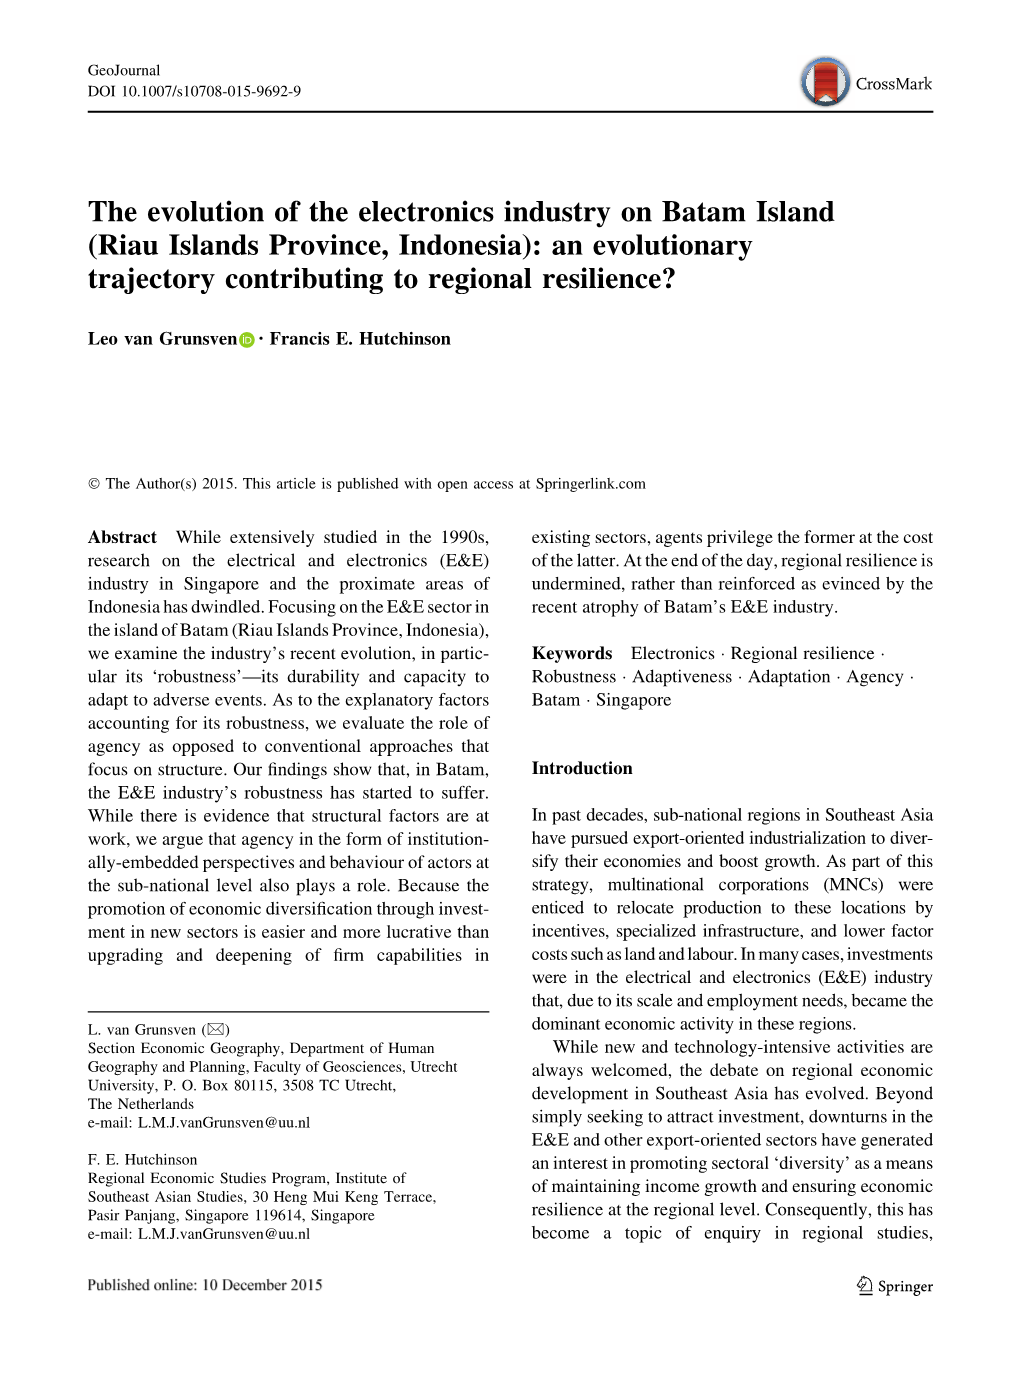 The Evolution of the Electronics Industry on Batam Island (Riau Islands Province, Indonesia): an Evolutionary Trajectory Contributing to Regional Resilience?